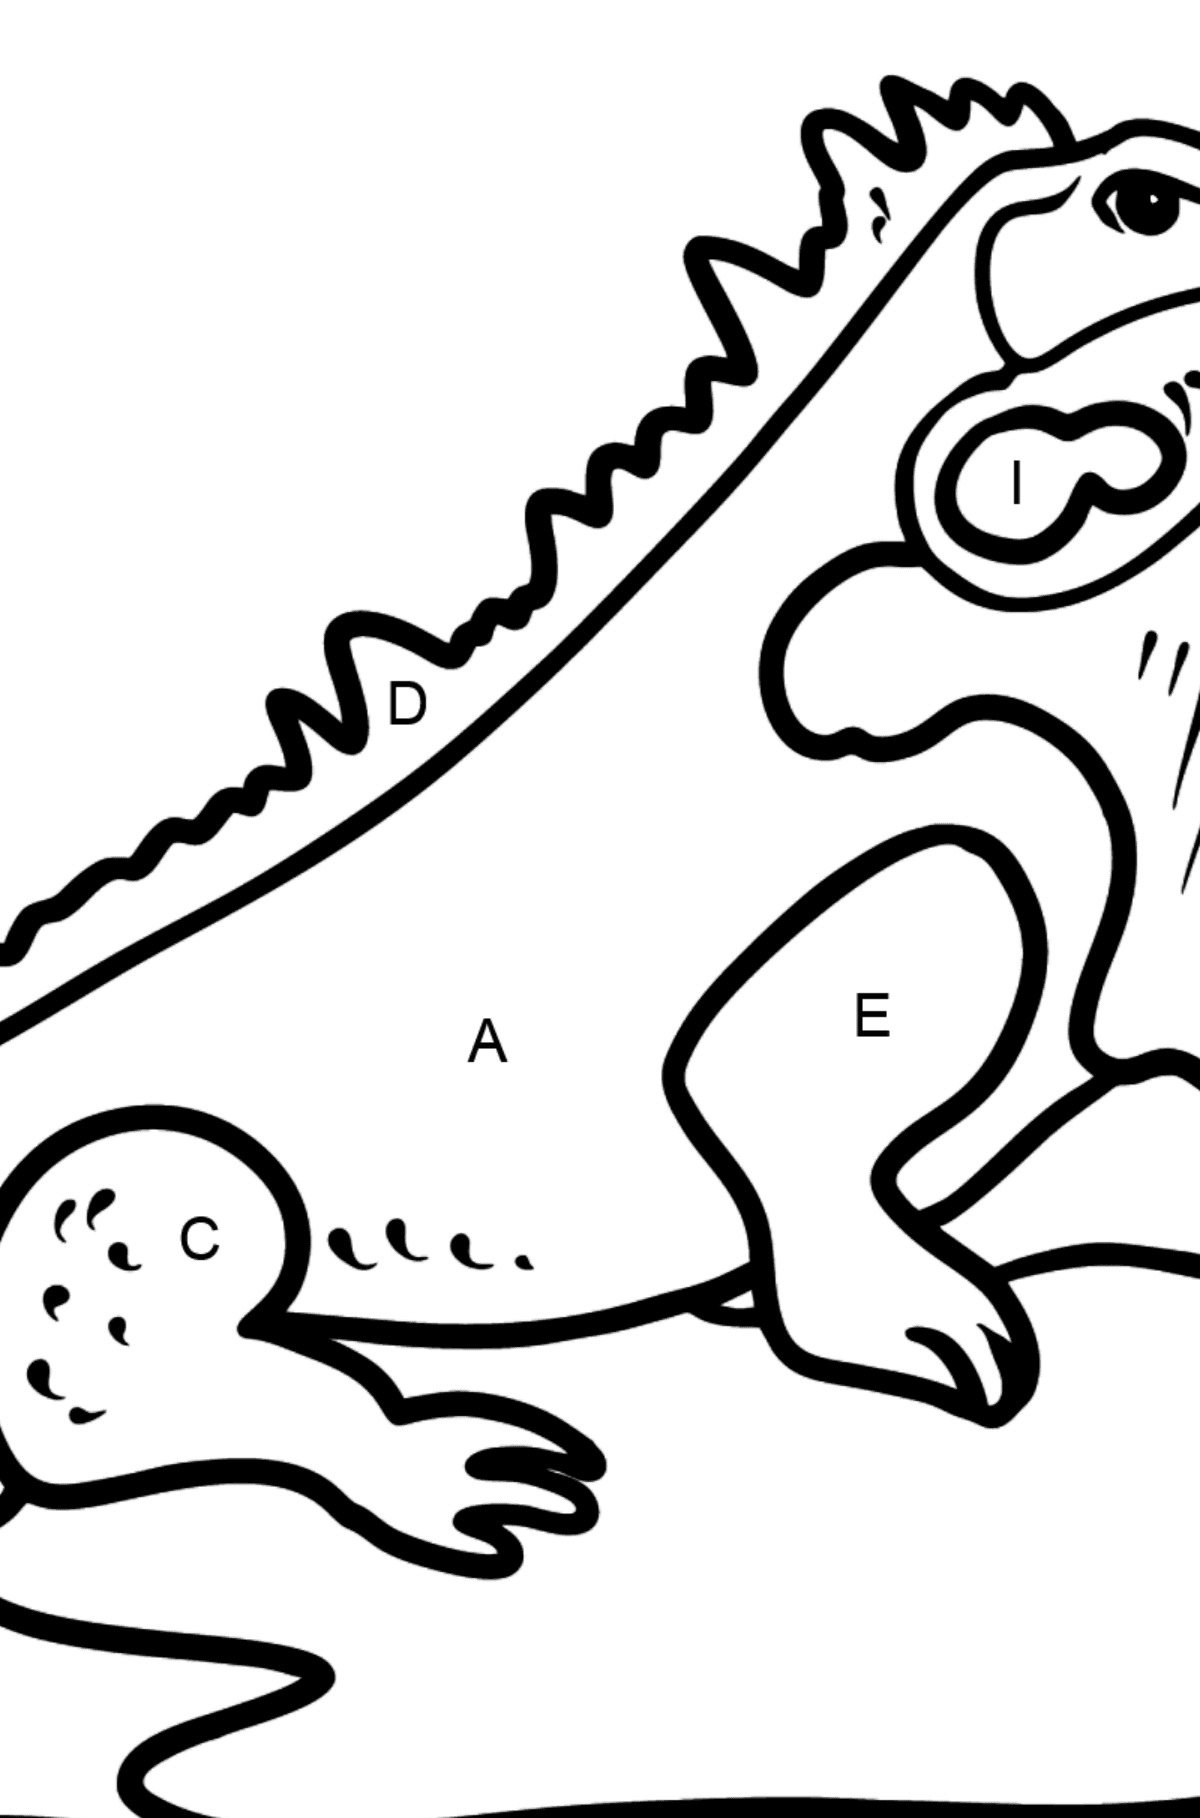 Portuguese Letter I coloring pages - IGUANA - Coloring by Letters for Kids